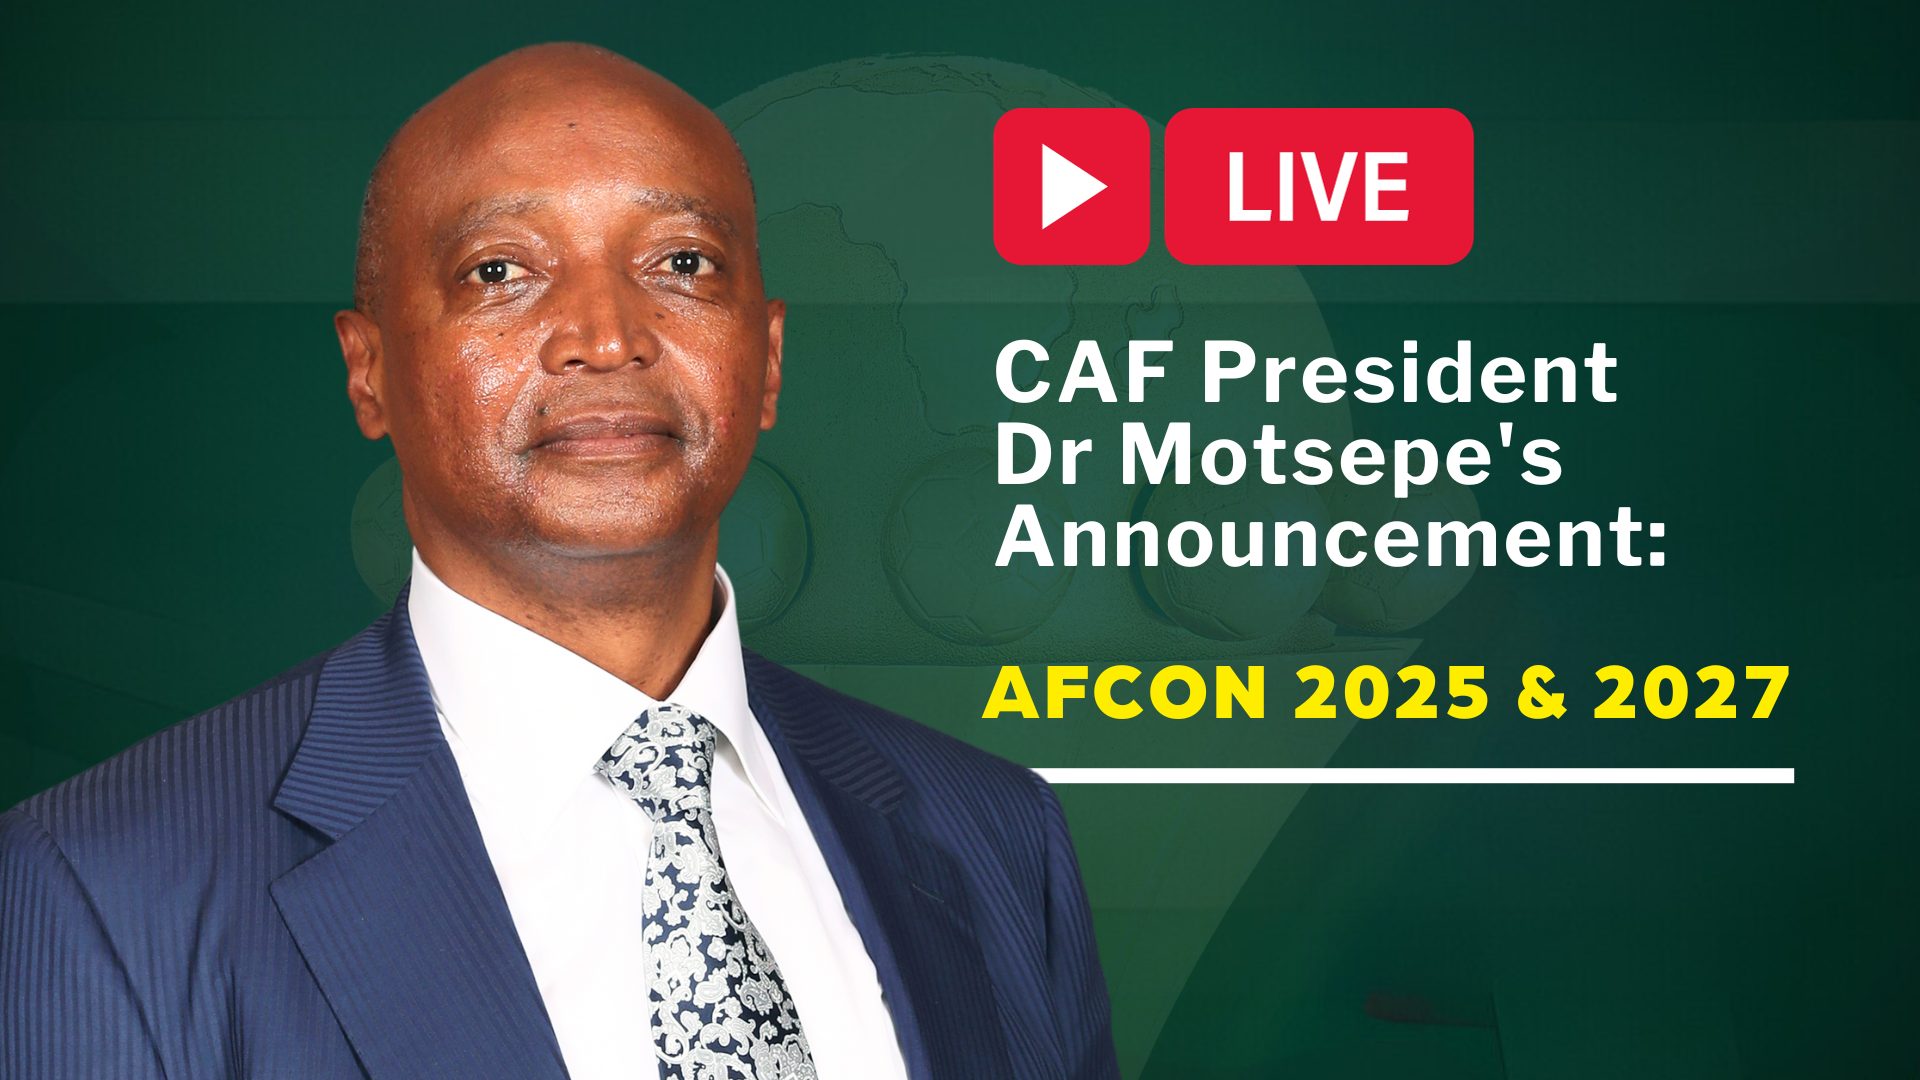 WATCH LIVE: CAF President Dr Motsepe's Announcement: AFCON 2025 & 2027 